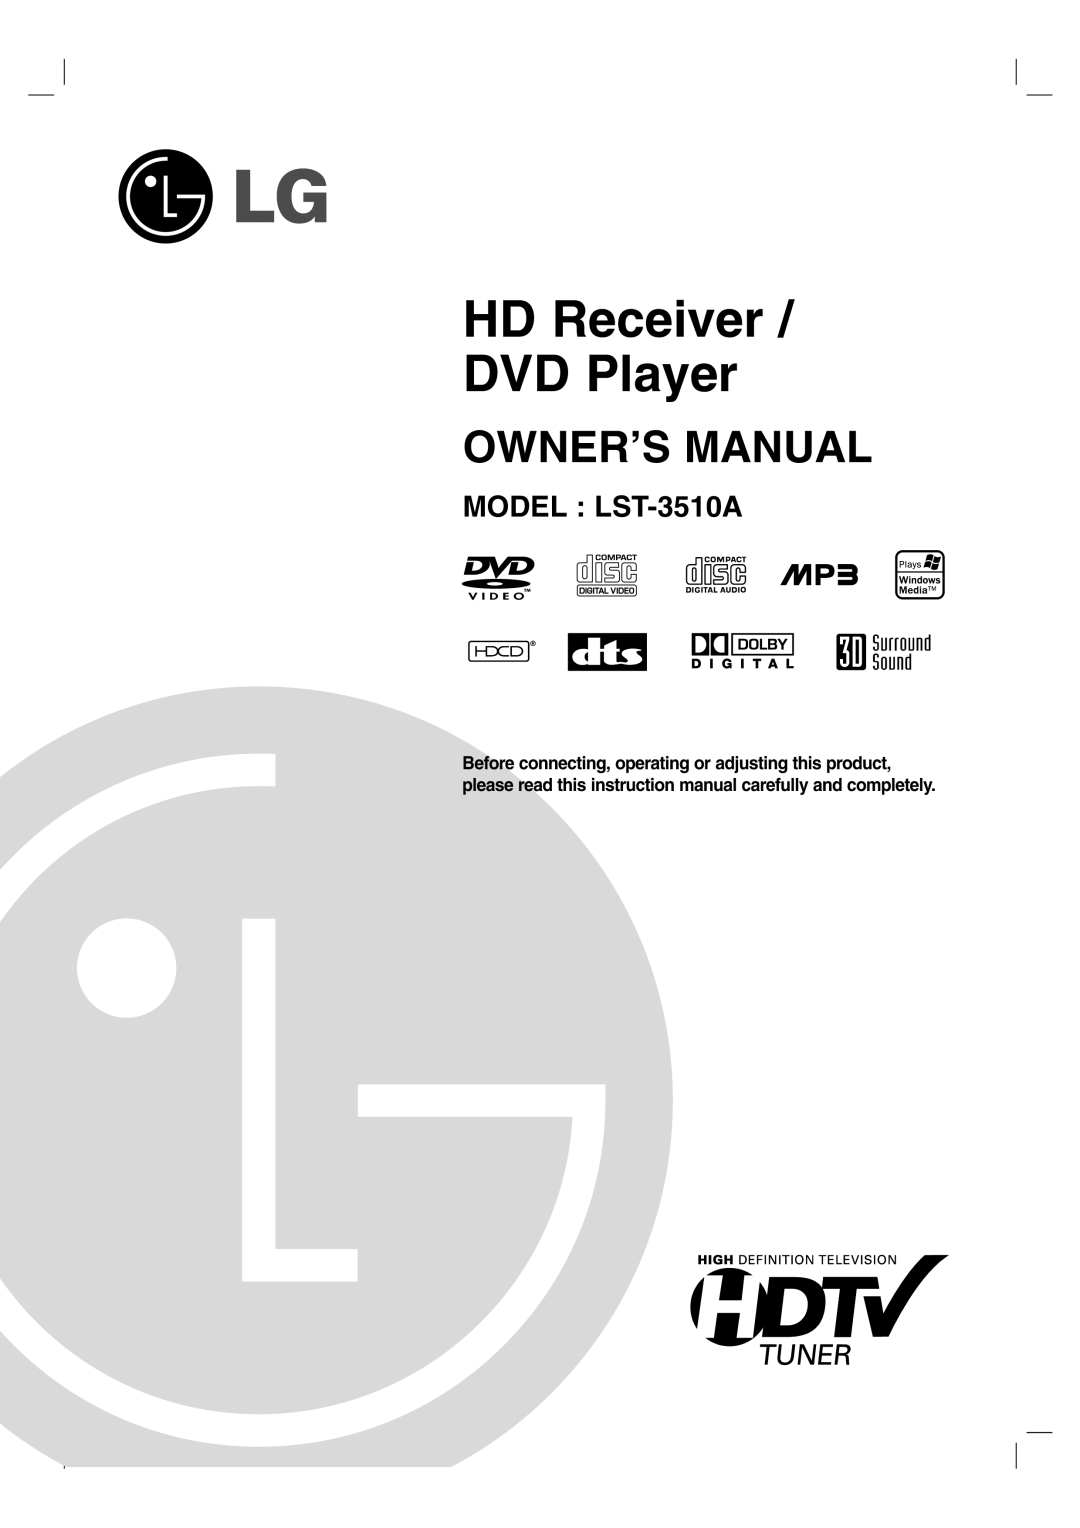 LG Electronics owner manual MODEL LST-3510A, HD Receiver DVD Player, Owner’S Manual 